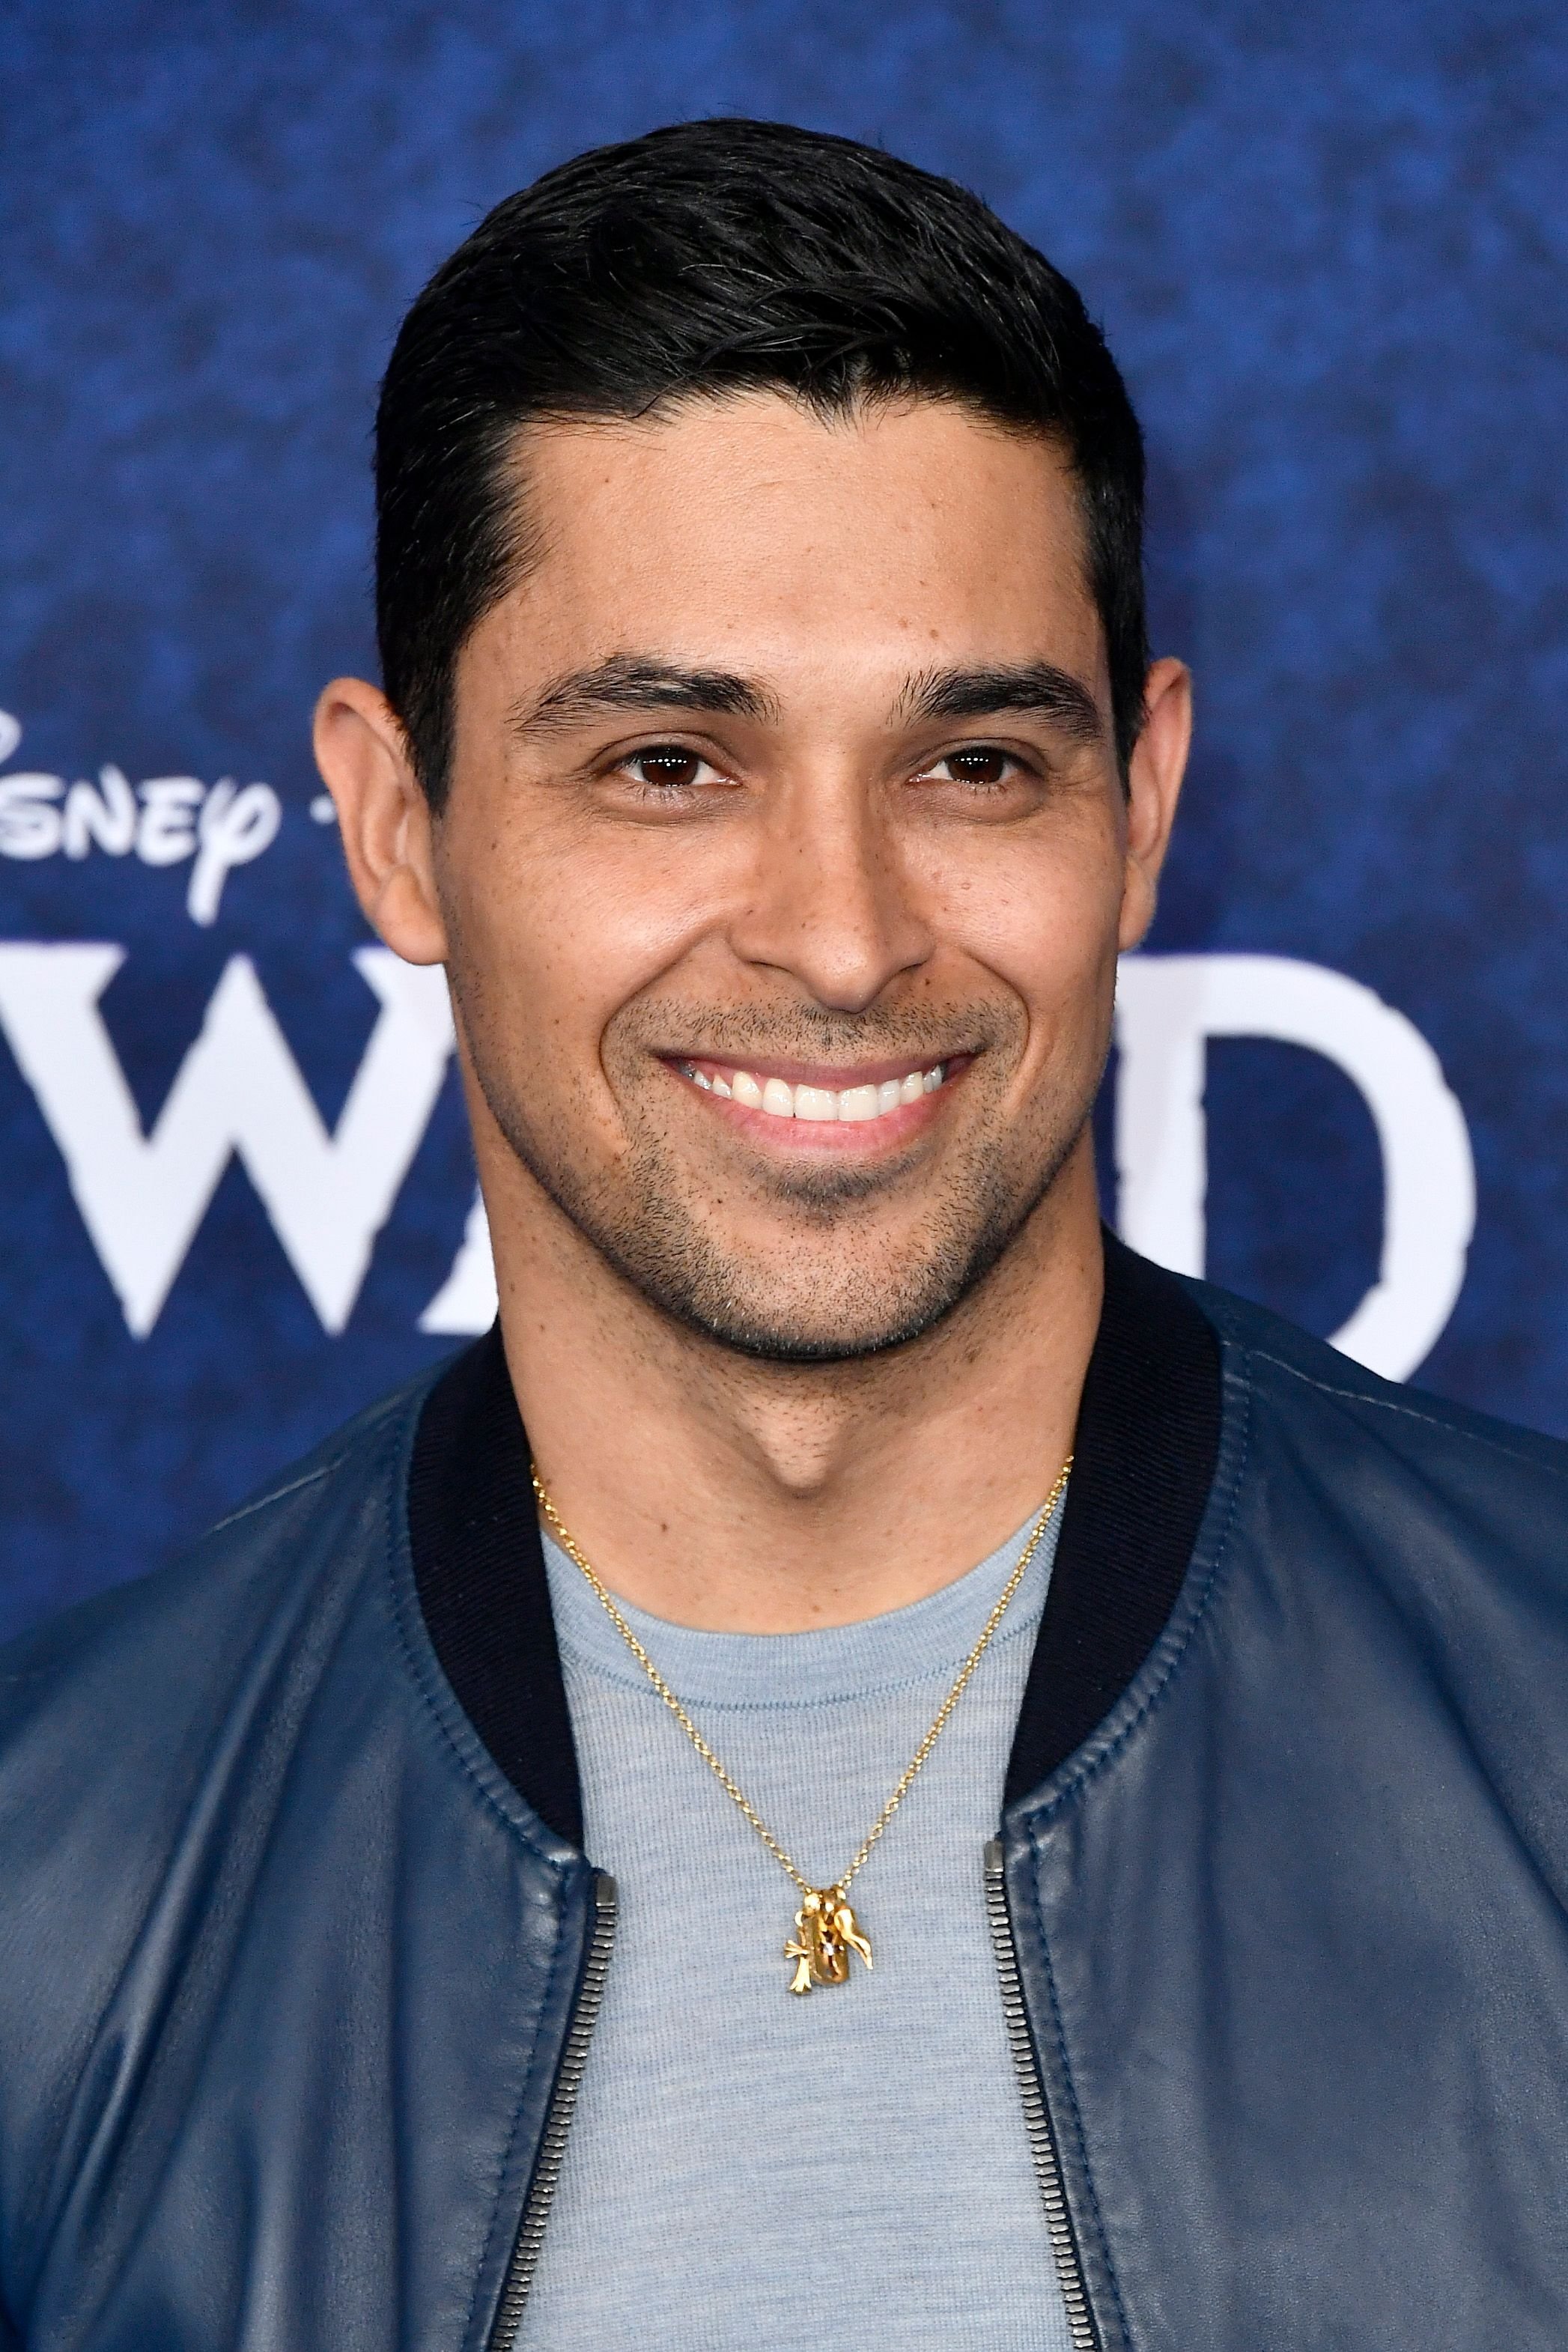 Wilmer Valderrama at the Premiere of  "Onward" on February 18, 2020 | Getty Images